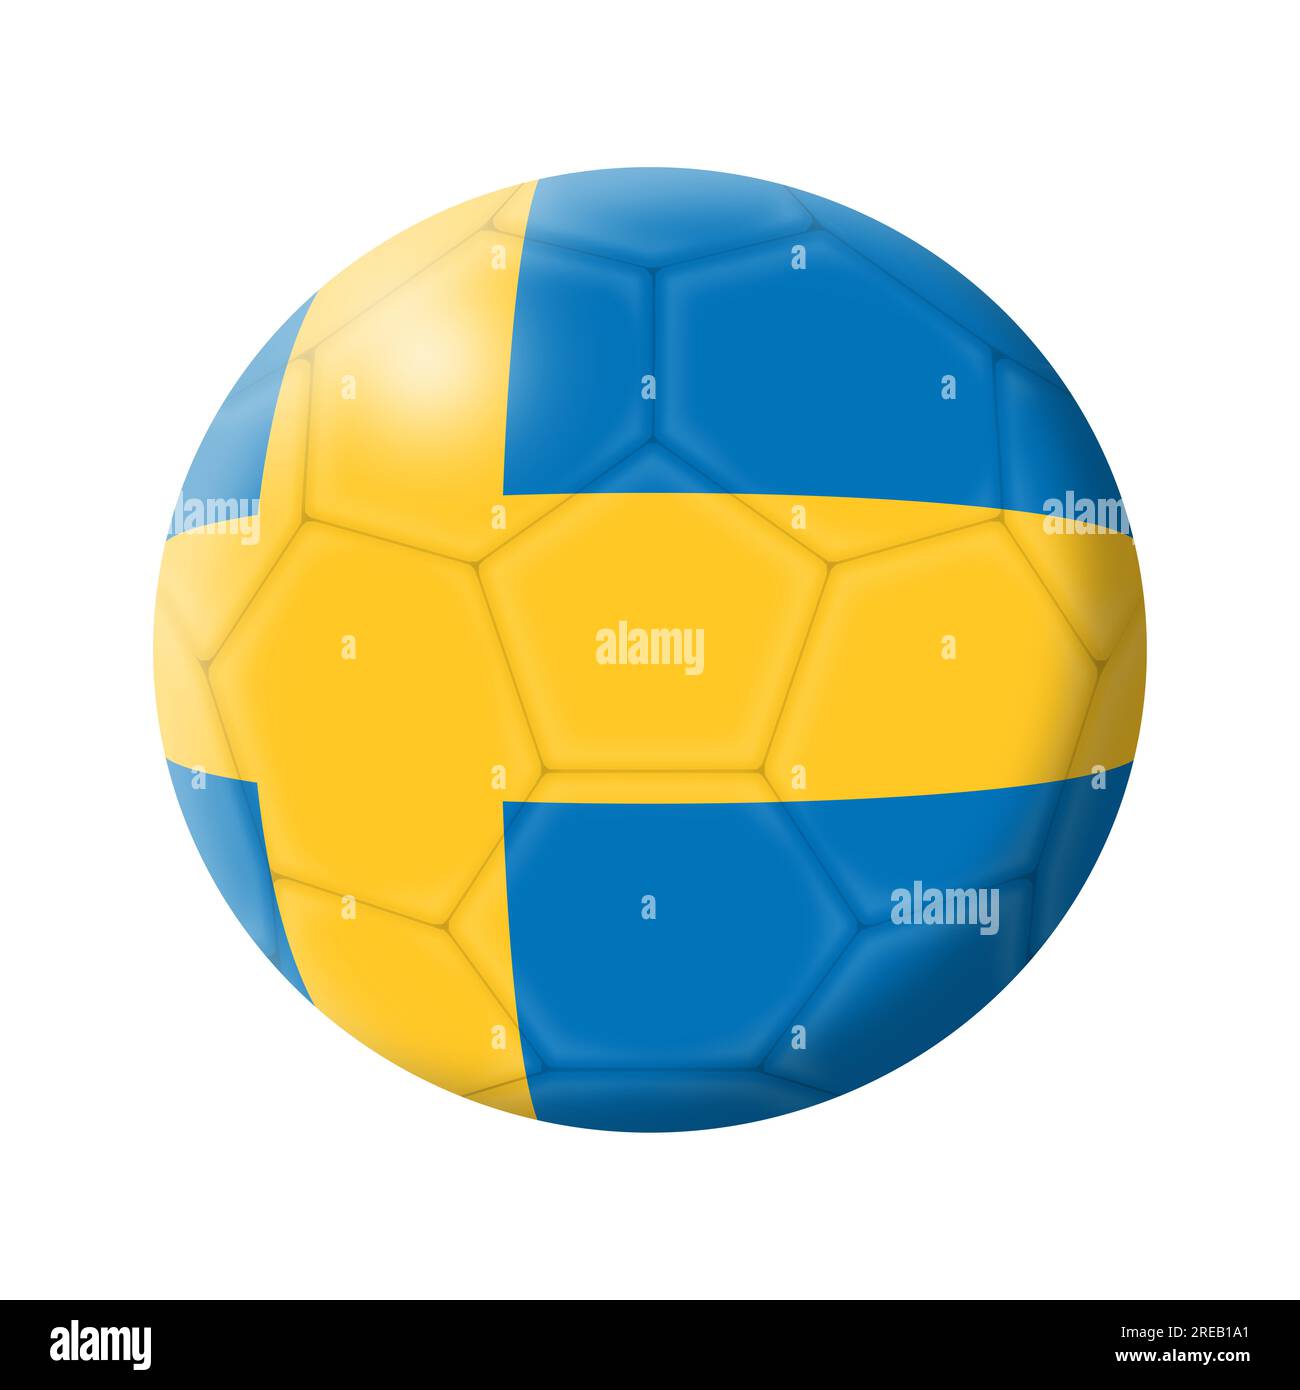 Sweden soccer ball football 3d illustration isolated on white with clipping path Stock Photo